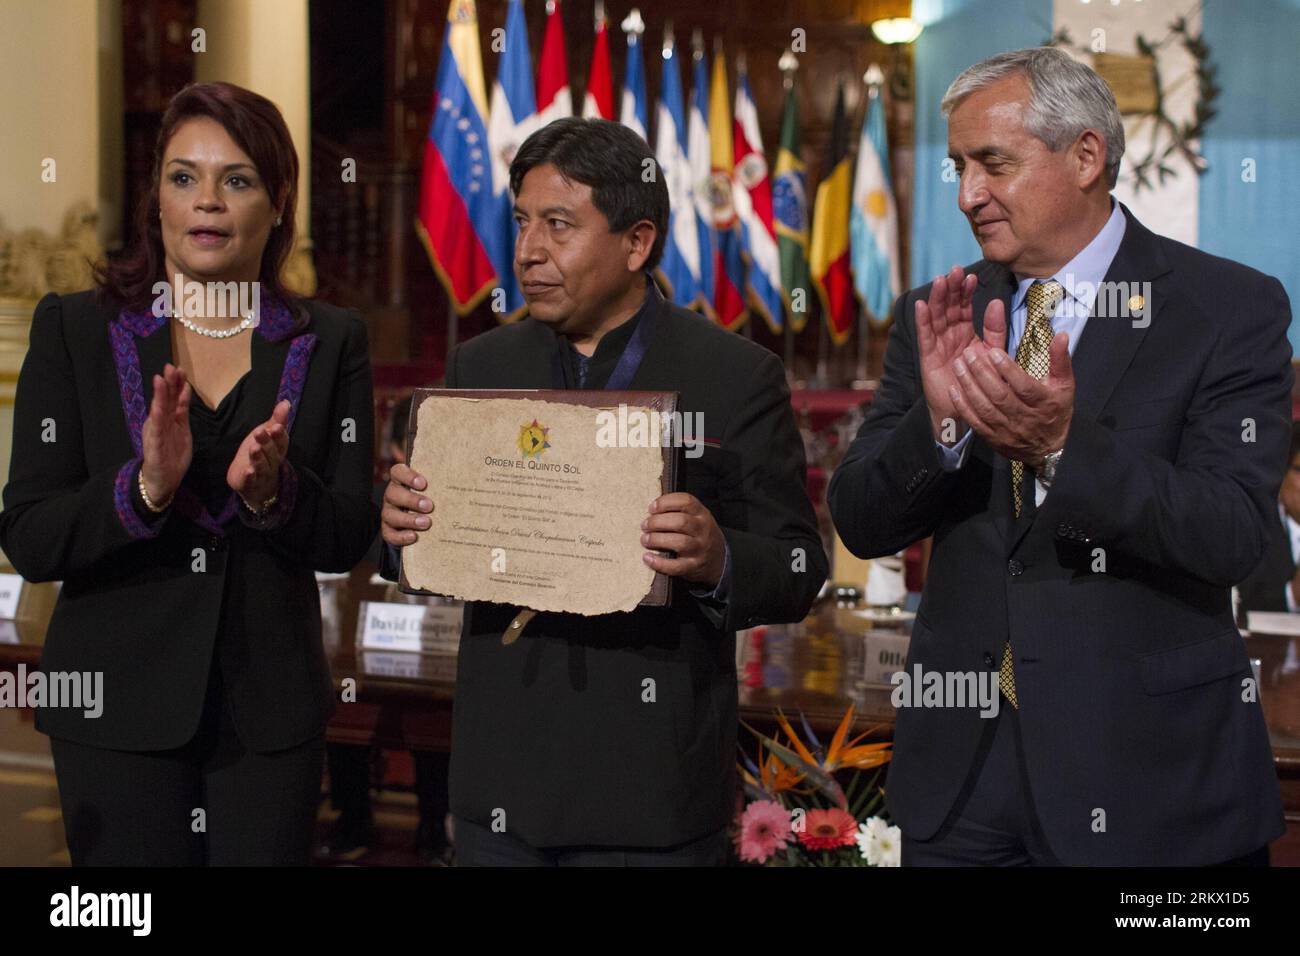 Bildnummer: 58855119  Datum: 29.11.2012  Copyright: imago/Xinhua Foreign Minister of Bolivia David Choquehuanca (C) receives the recognition Orden el Quinto Sol , accompanied by Guatemalan President Otto Perez Molina (R) and Guatemalan Vice President Roxana Baldetti in the framework of the X Assembly of the Fund for the Development of Indigenous Peoples of Latin America and the Caribbean at the Cultural National Palace, in Guatemala City, capital of Guatemala, on Nov. 29, 2012. (Xinhua/Luis Echeverria) (bxq) GUATEMALA-GUATEMALA CITY-ASSEMBLY PUBLICATIONxNOTxINxCHN People Politik Guatemala x0x Stock Photo